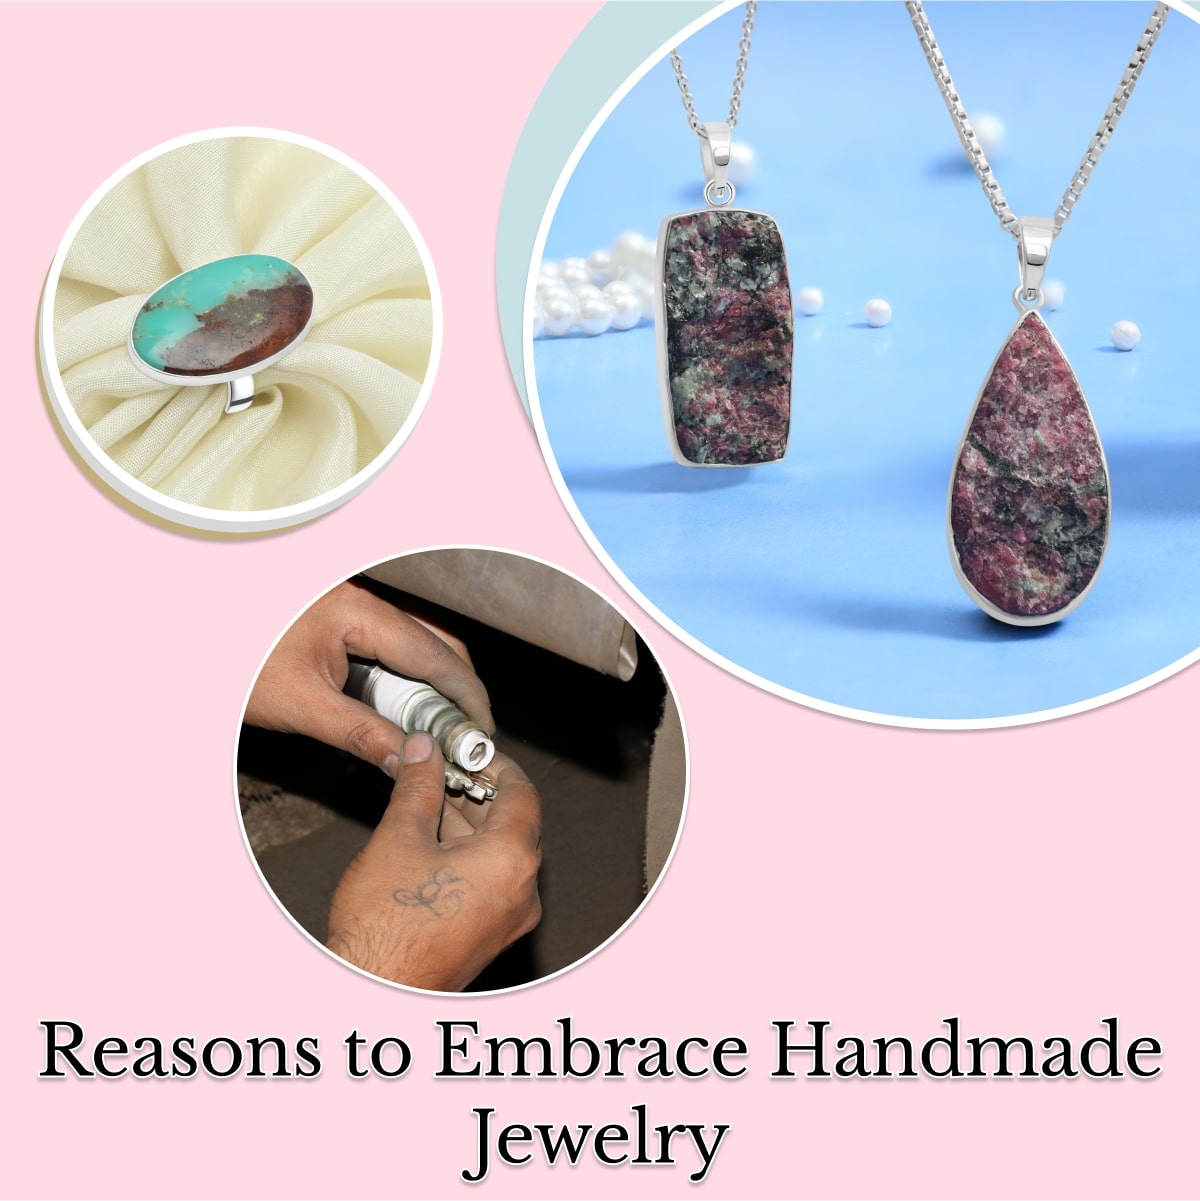 Why Should Handmade Jewelry Be a Part of Your Collection